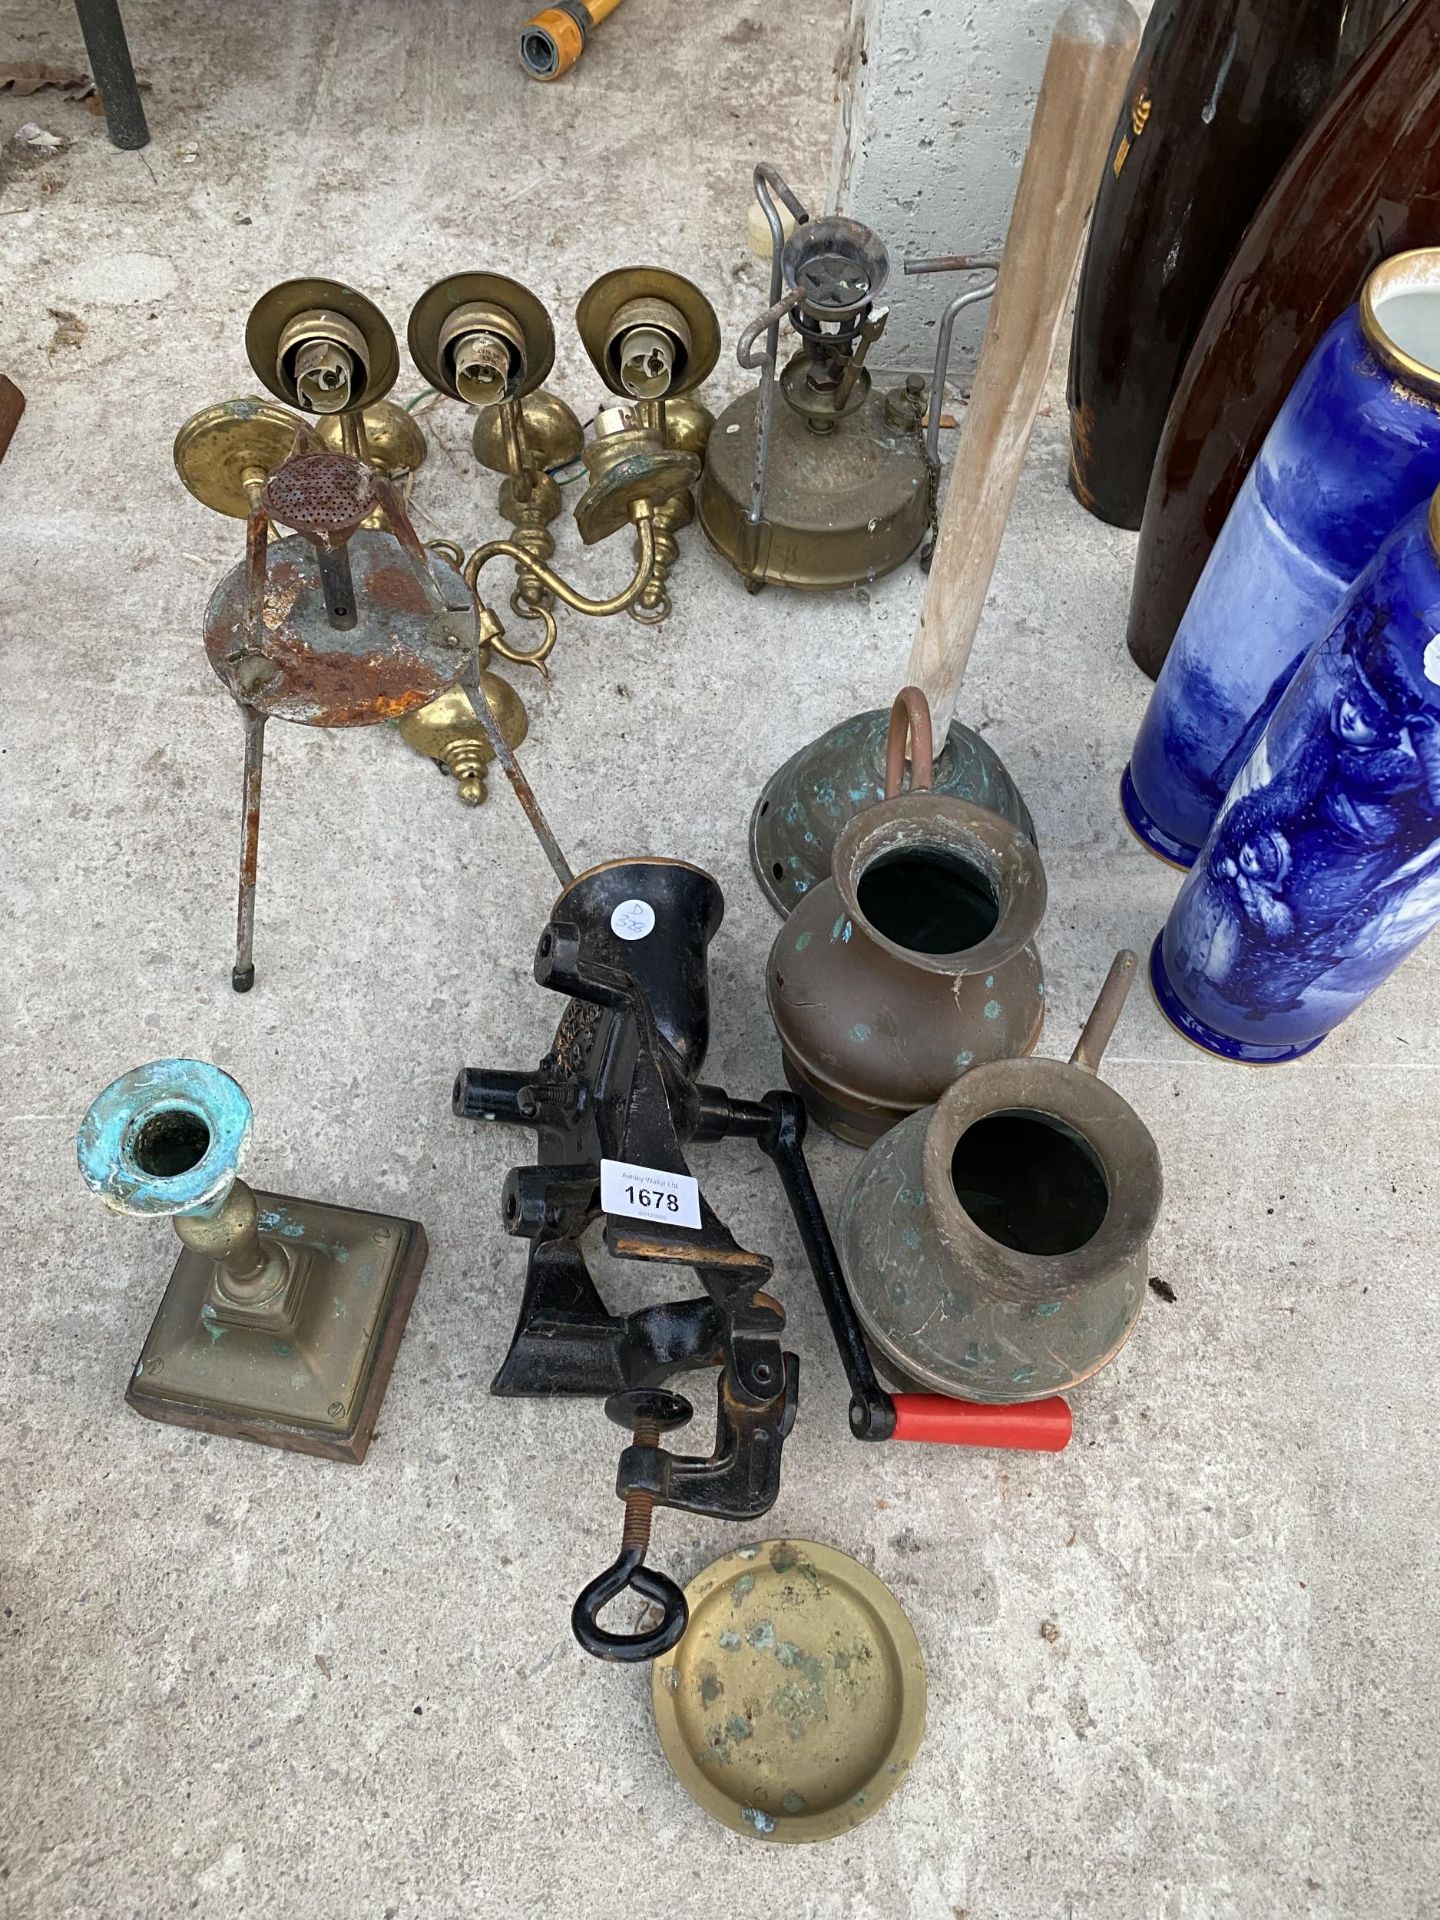 AN ASSORTMENT OF METALWARE ITEMS TO INCLUDE A COPPER POSSER, TWO COPPER JUGS AND A BEAN SLICER ETC